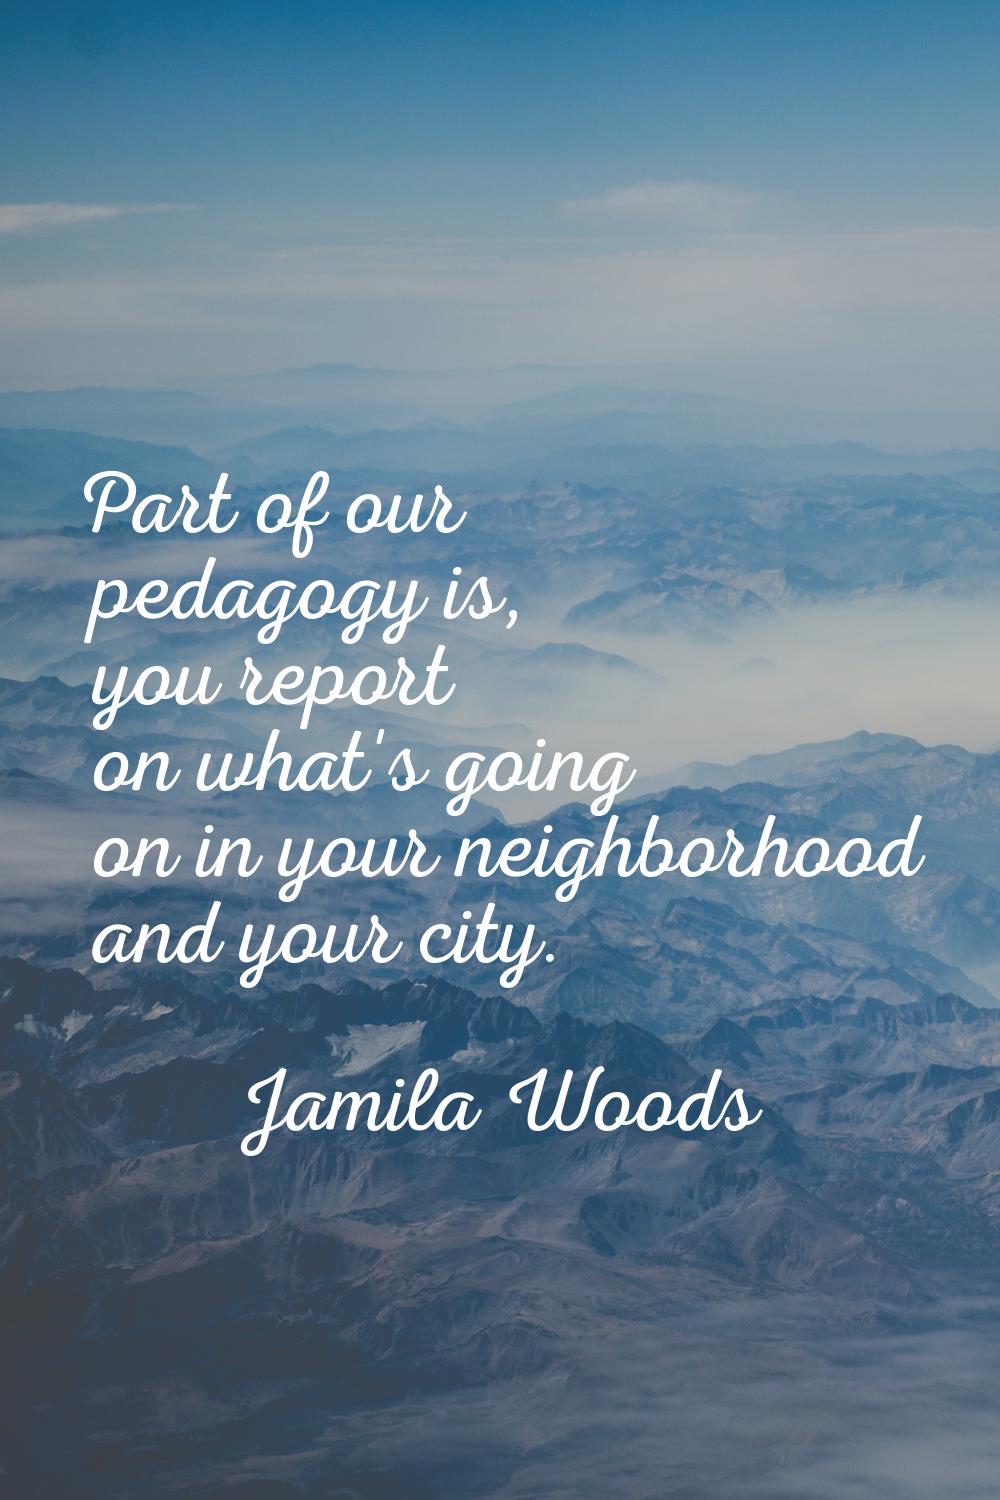 Part of our pedagogy is, you report on what's going on in your neighborhood and your city.